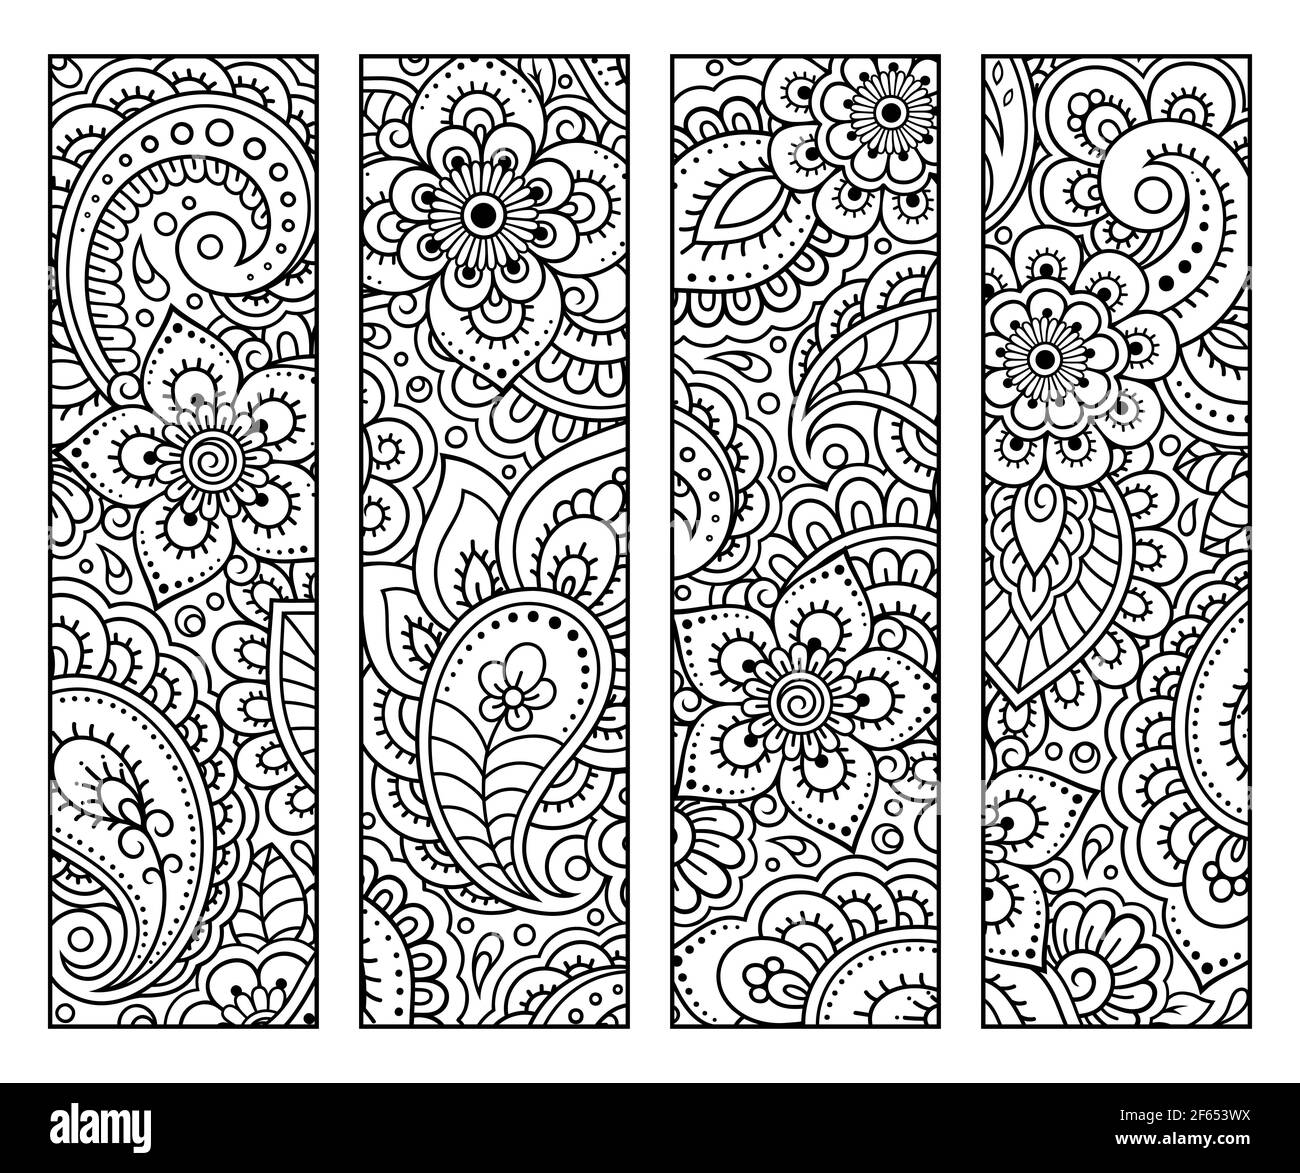 Bookmark for book - coloring. Set of black and white labels with floral doodle patterns, hand draw in mehndi style. Sketch of ornaments for creativity Stock Photo